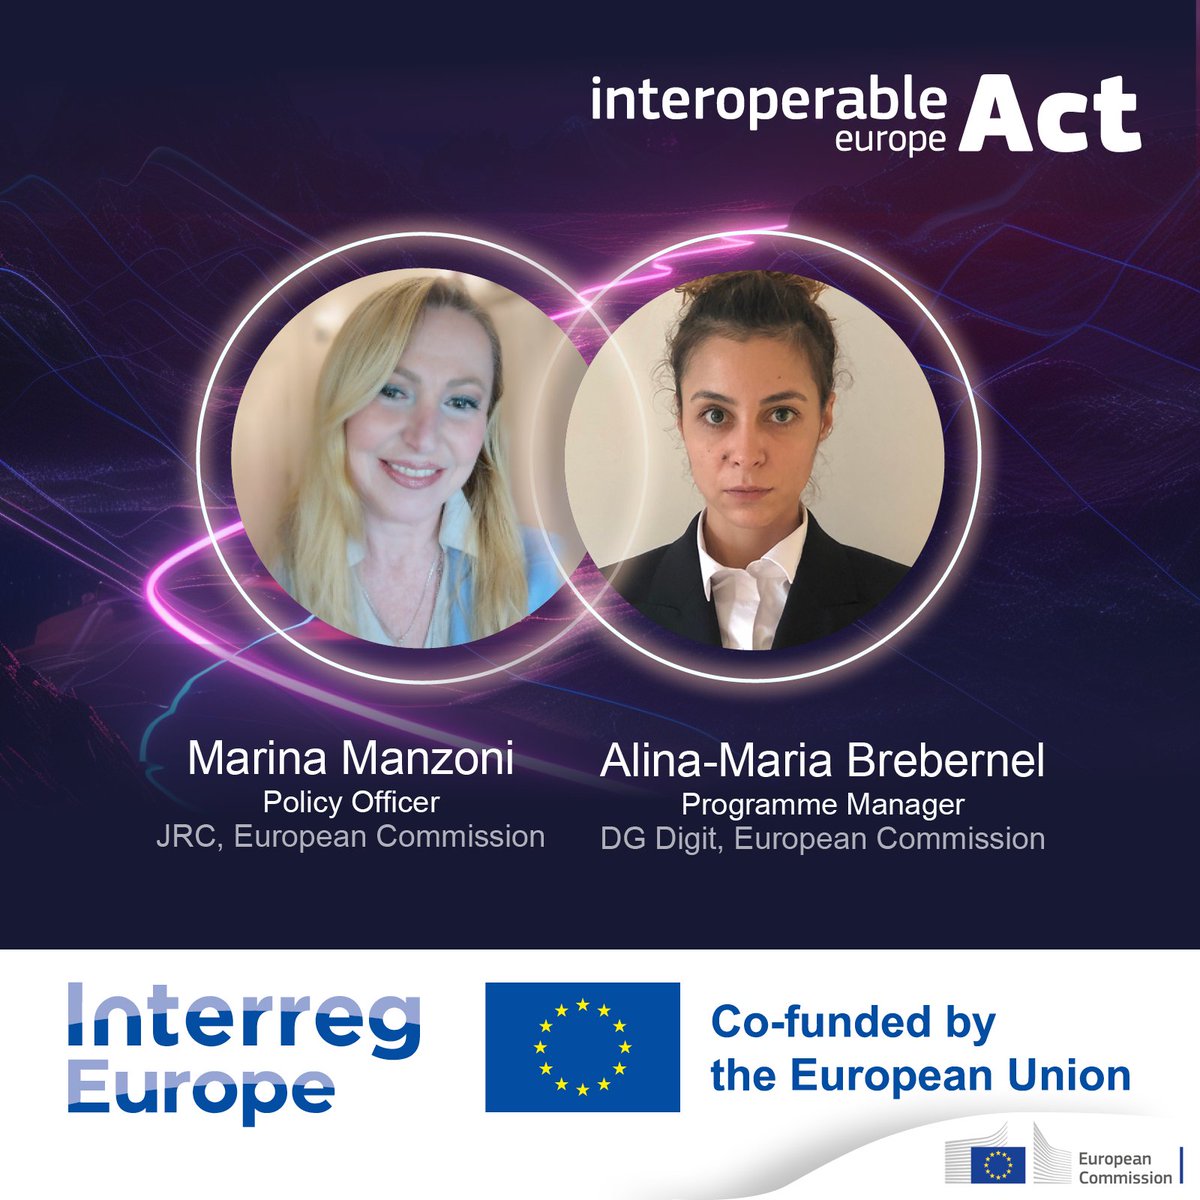 One week before the @Interregeurope Workshop on the #DigitalTransformation of #PublicServices.

Join our @EU_ScienceHub Policy officer Marina Manzoni and our Programme Manager Alina-Maria Breberneli in #Vilnius🇱🇹!  

More info:👉interregeurope.eu/event/digital-…

#IOPAct #GovTech